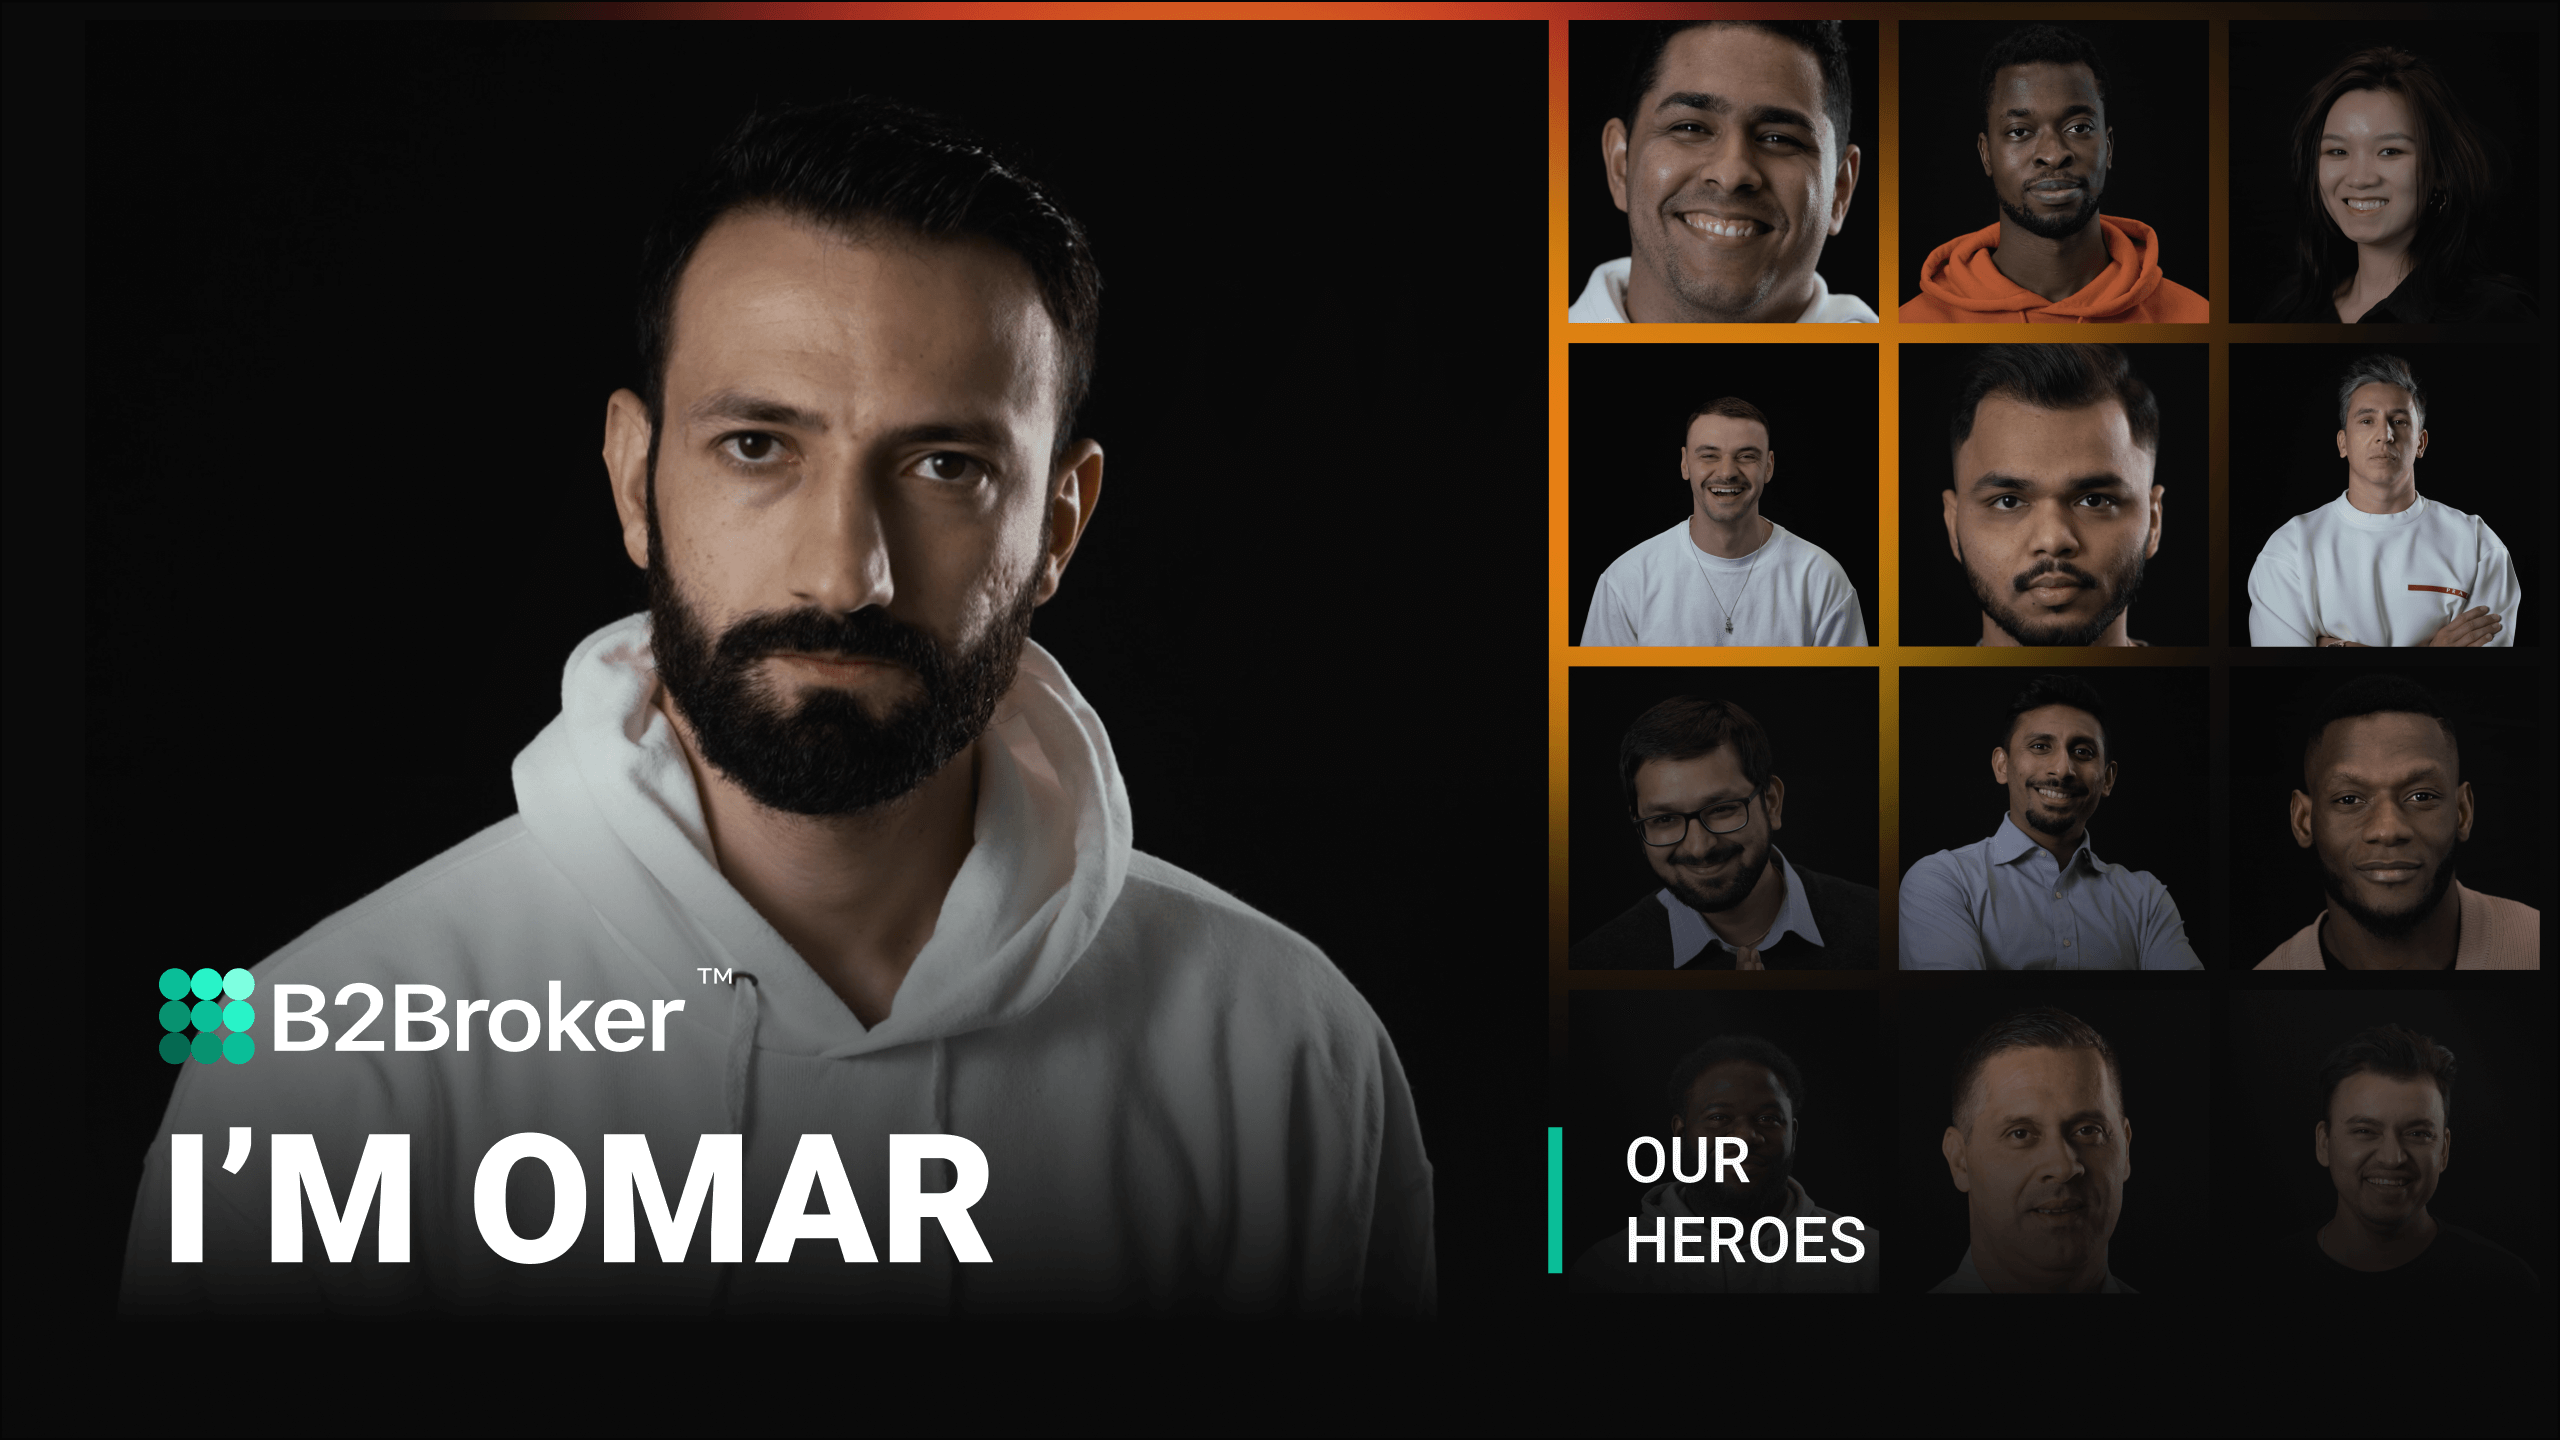 Our Heroes | Episode 2 | The challenges and triumphs of Omar’s life and career